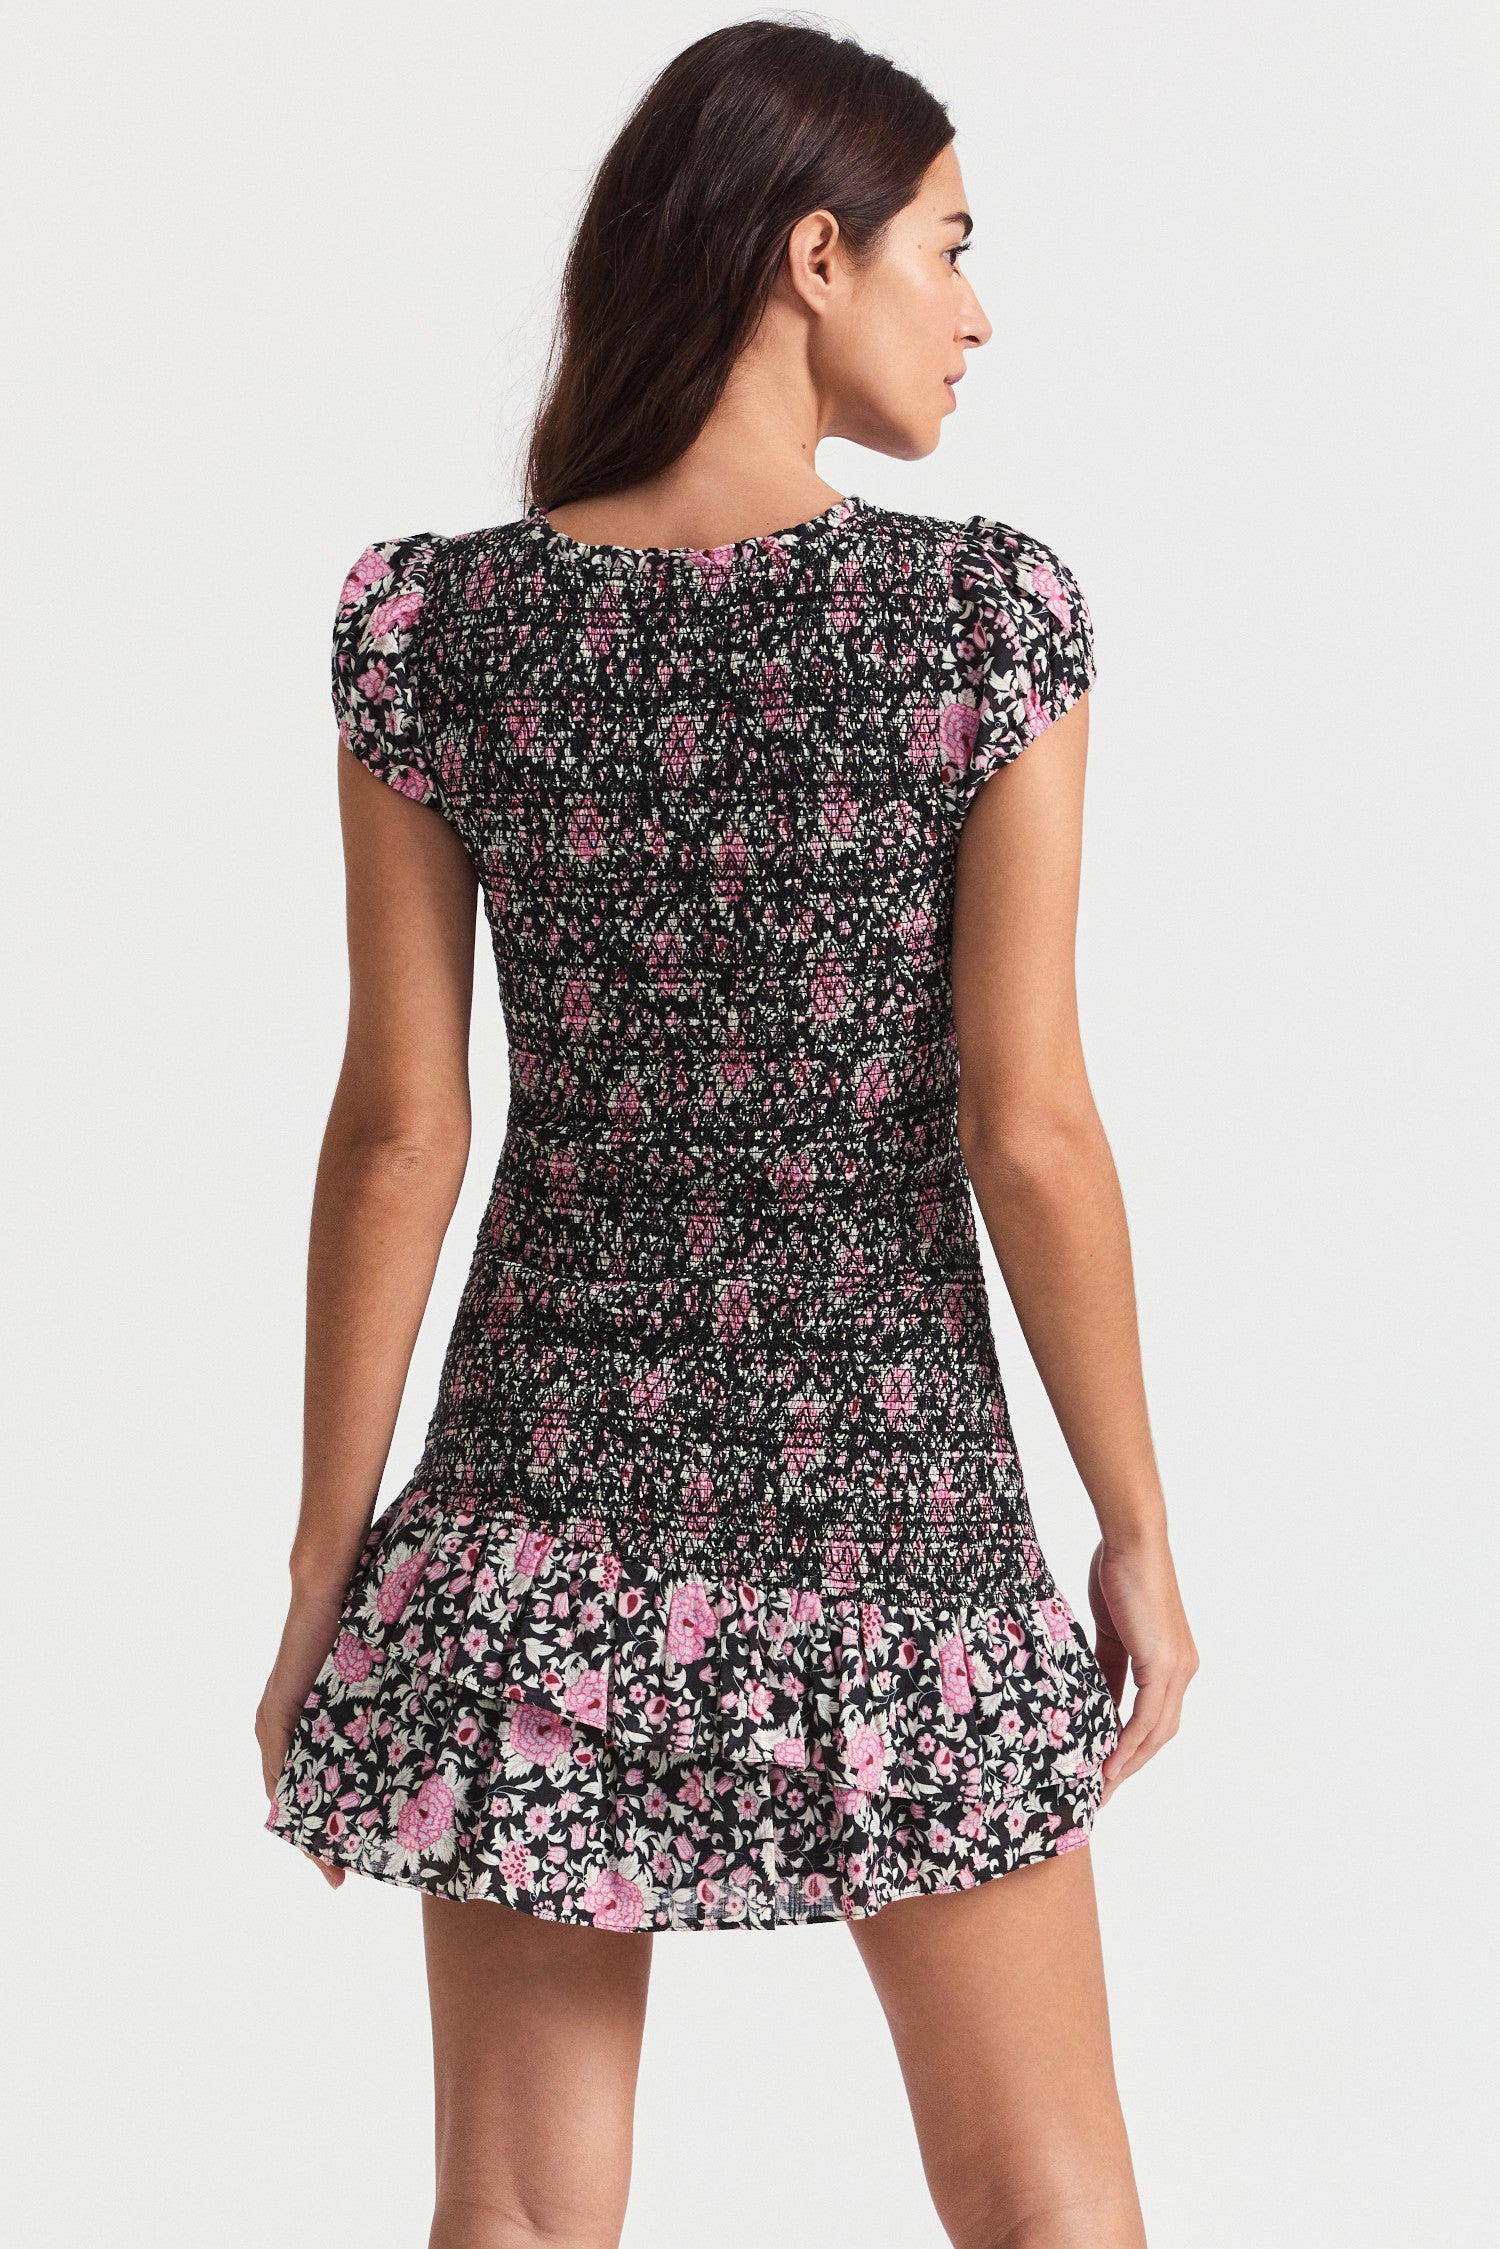 Black mini floral print dress. With short ruffle-trimmed v-neck, a completely smocked bodice, gathered at mid-bust, and part puffed sleeves. At bottom, the asymmetrical skirt flares to two layered flounces.